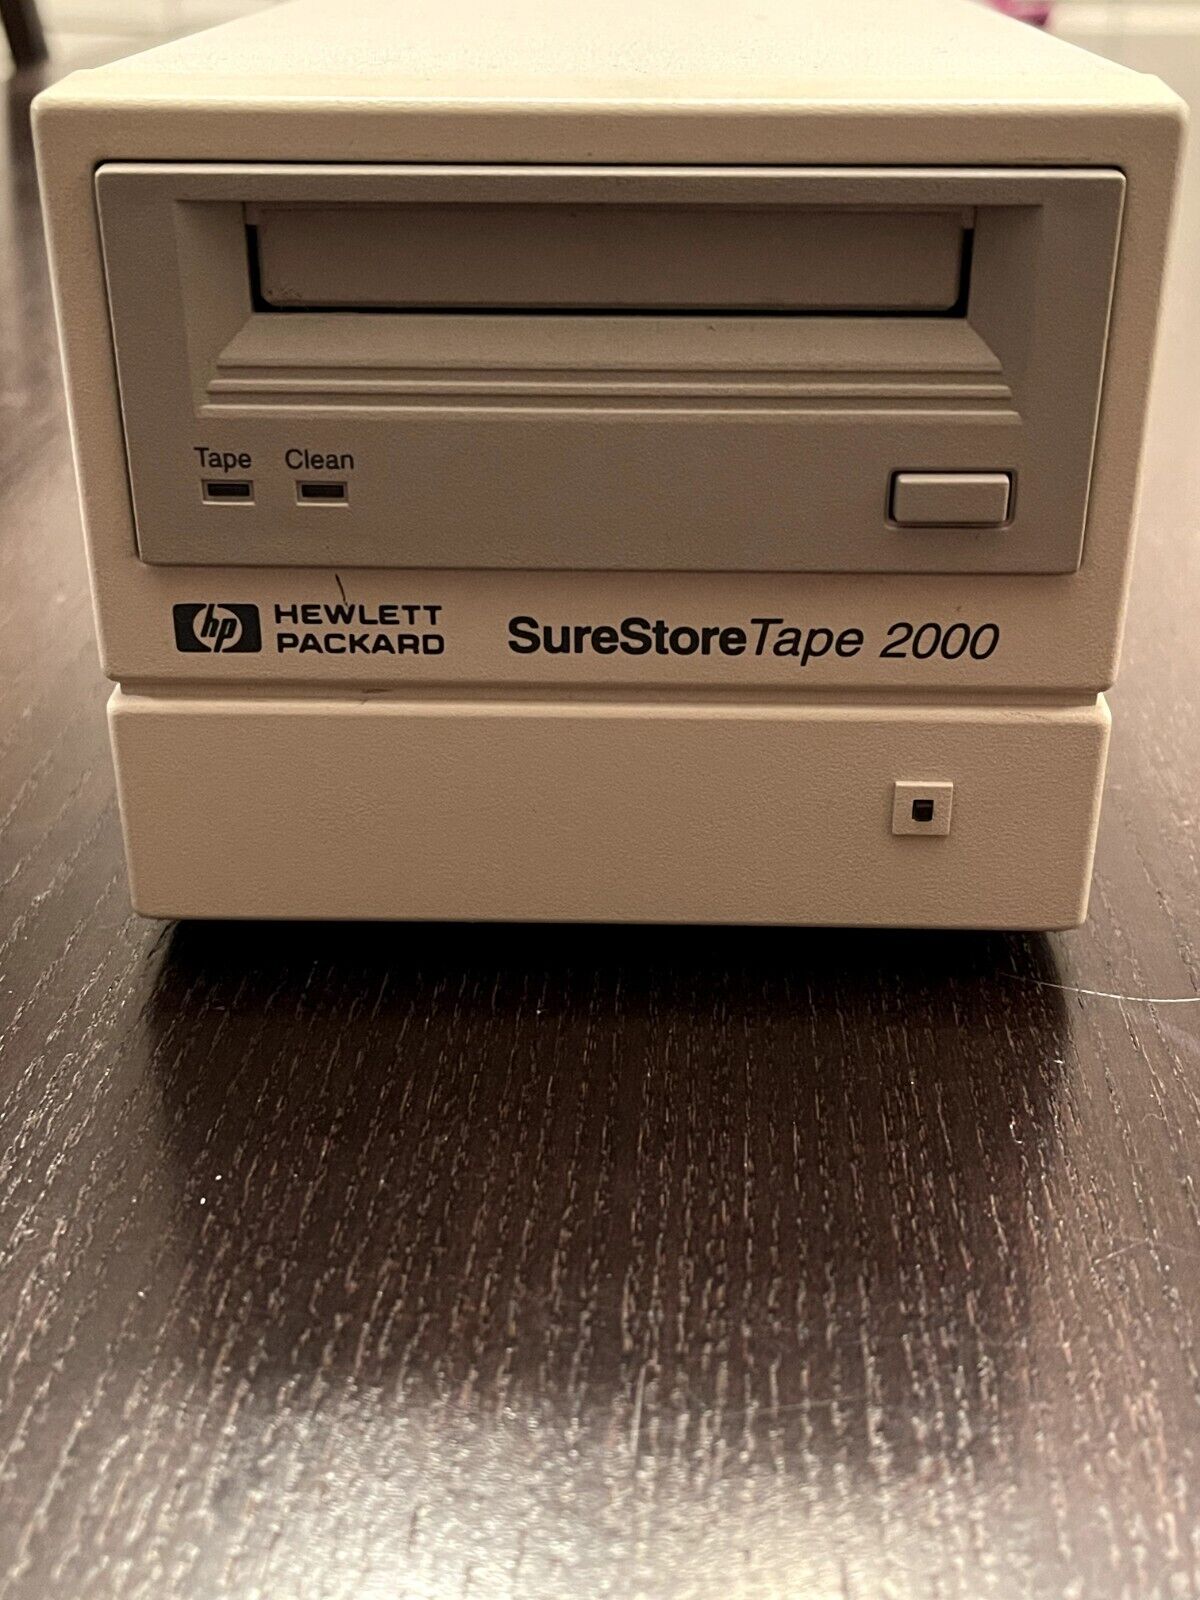 Hewlett Packard DAT Internal Drive Sure Store Tape 2000  with 8new 4GB tapes.